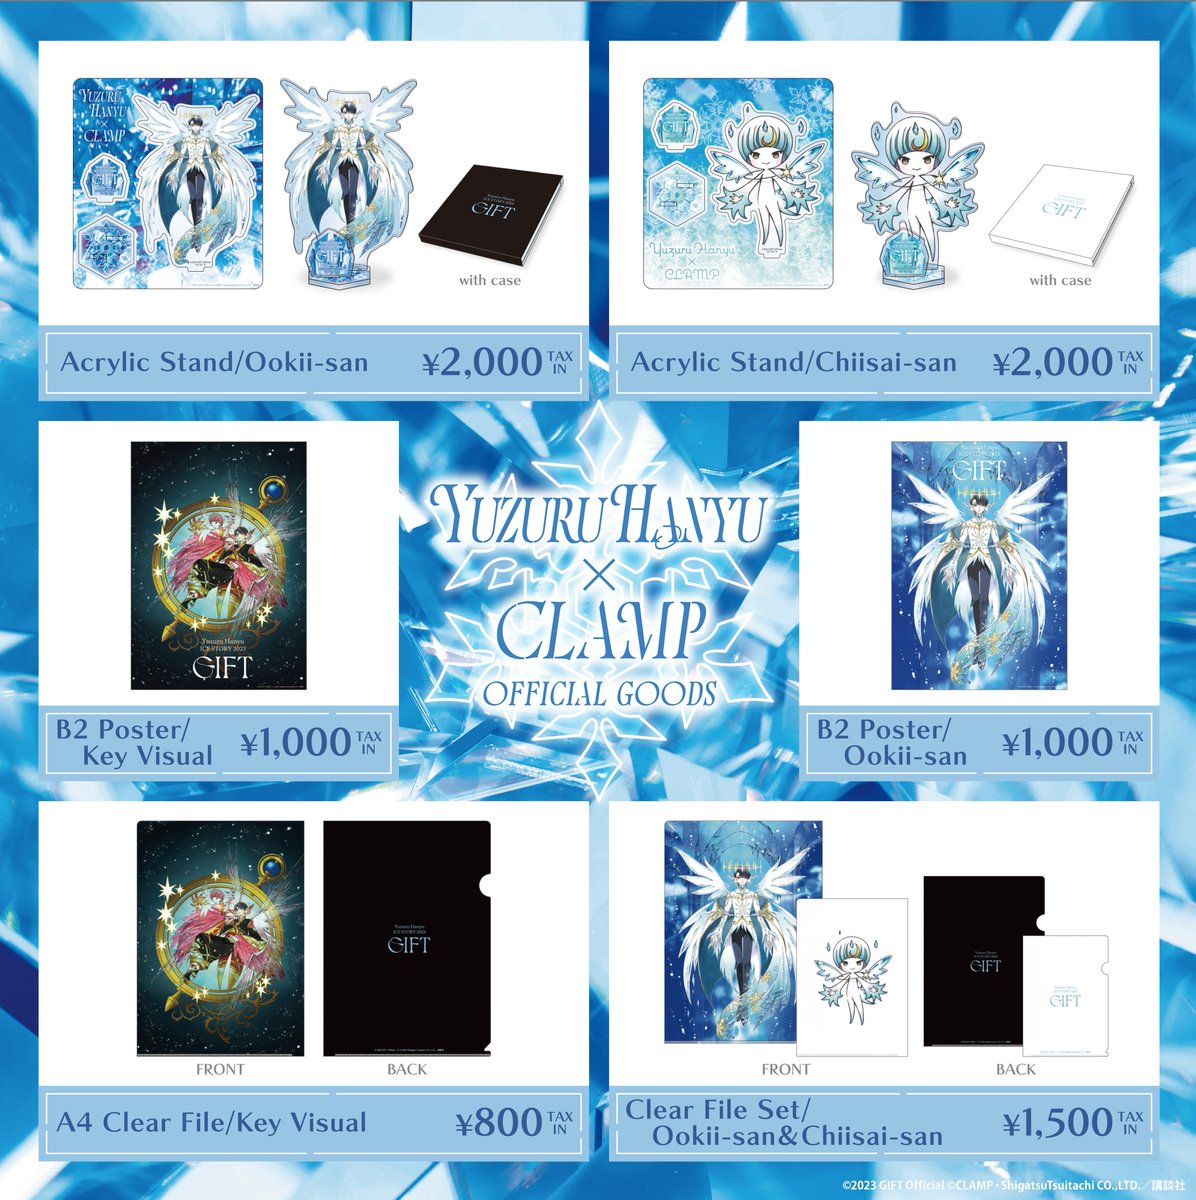 ／ #YuzuruHanyu × #CLAMP collaboration official goods are now available 🙌 ＼ Gorgeous lineup of Acrylic Stand, Poster, Clear File❄️ Please check it out with 'GIFT' official goods! 🛒Reservations & purchases can be here. asmart.jp/gift-official